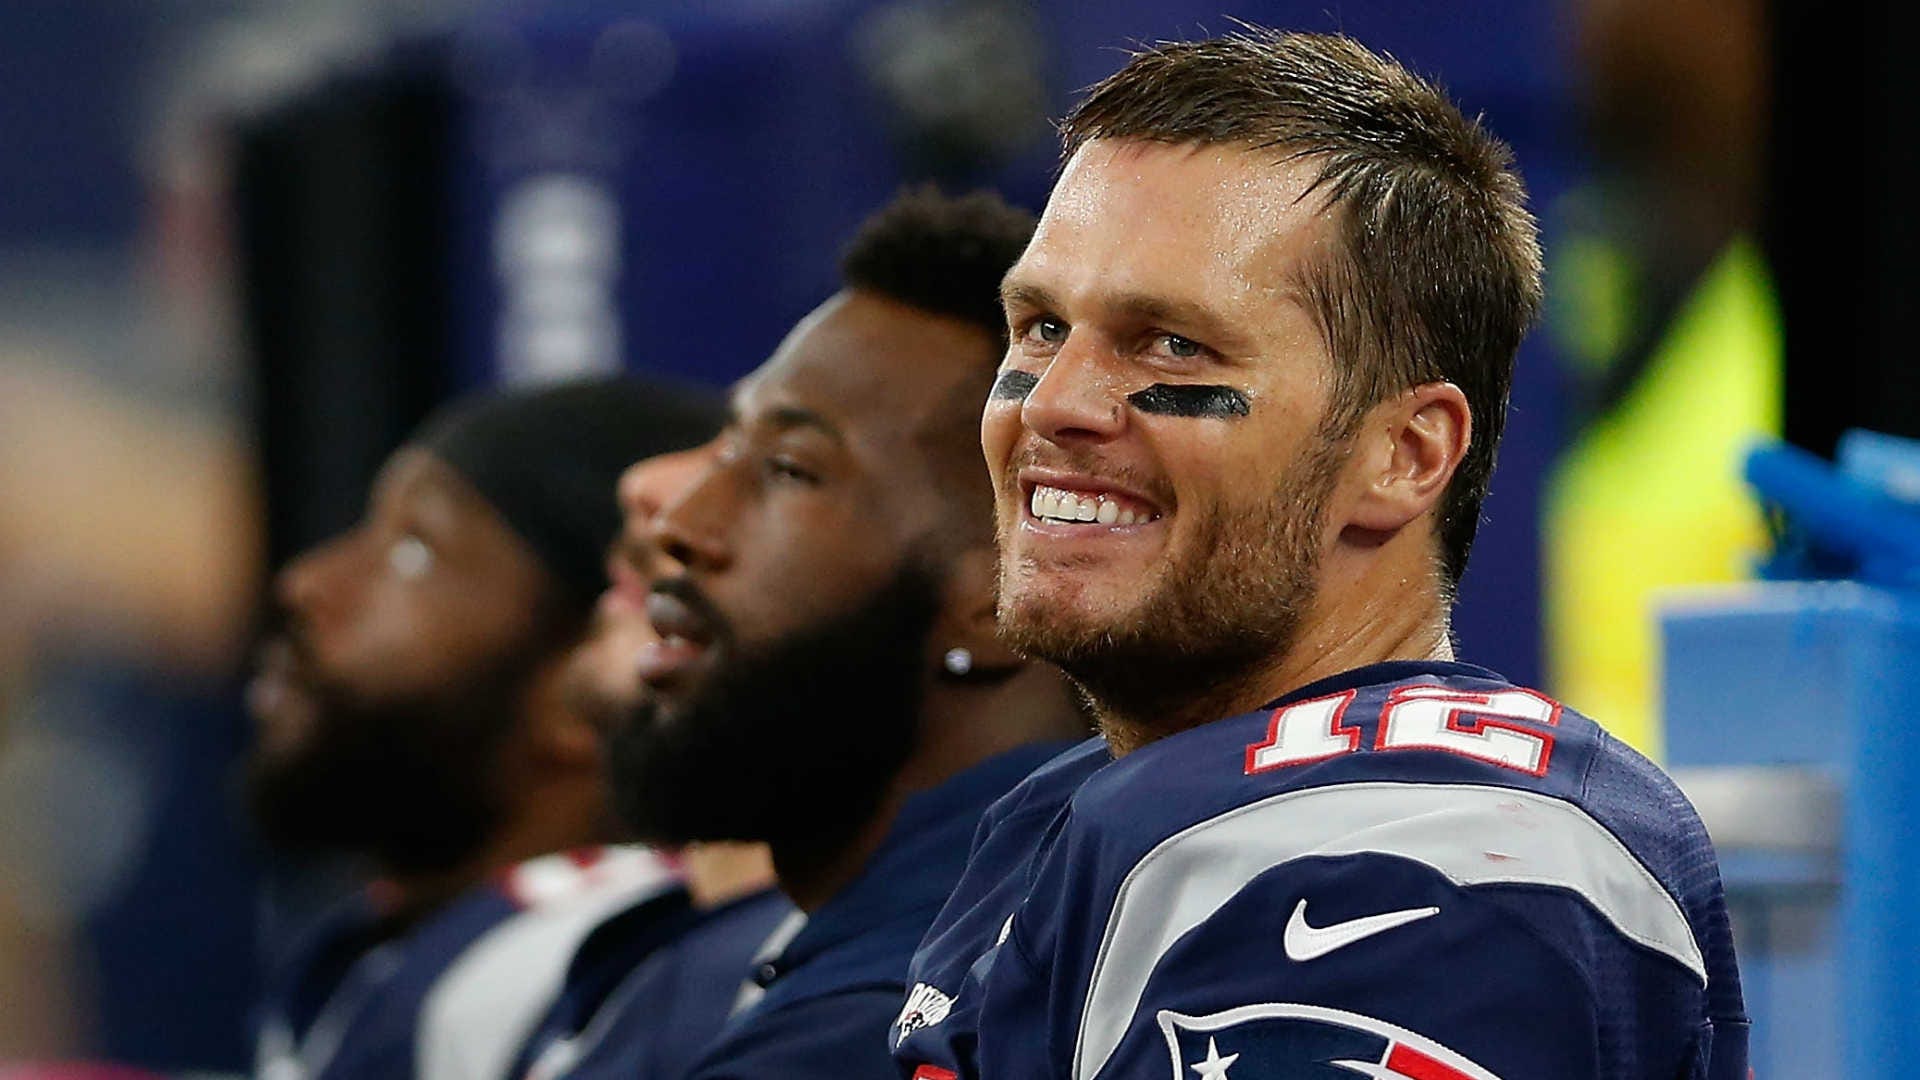 Super Bowl Champion Tom Brady partners up with Christopher